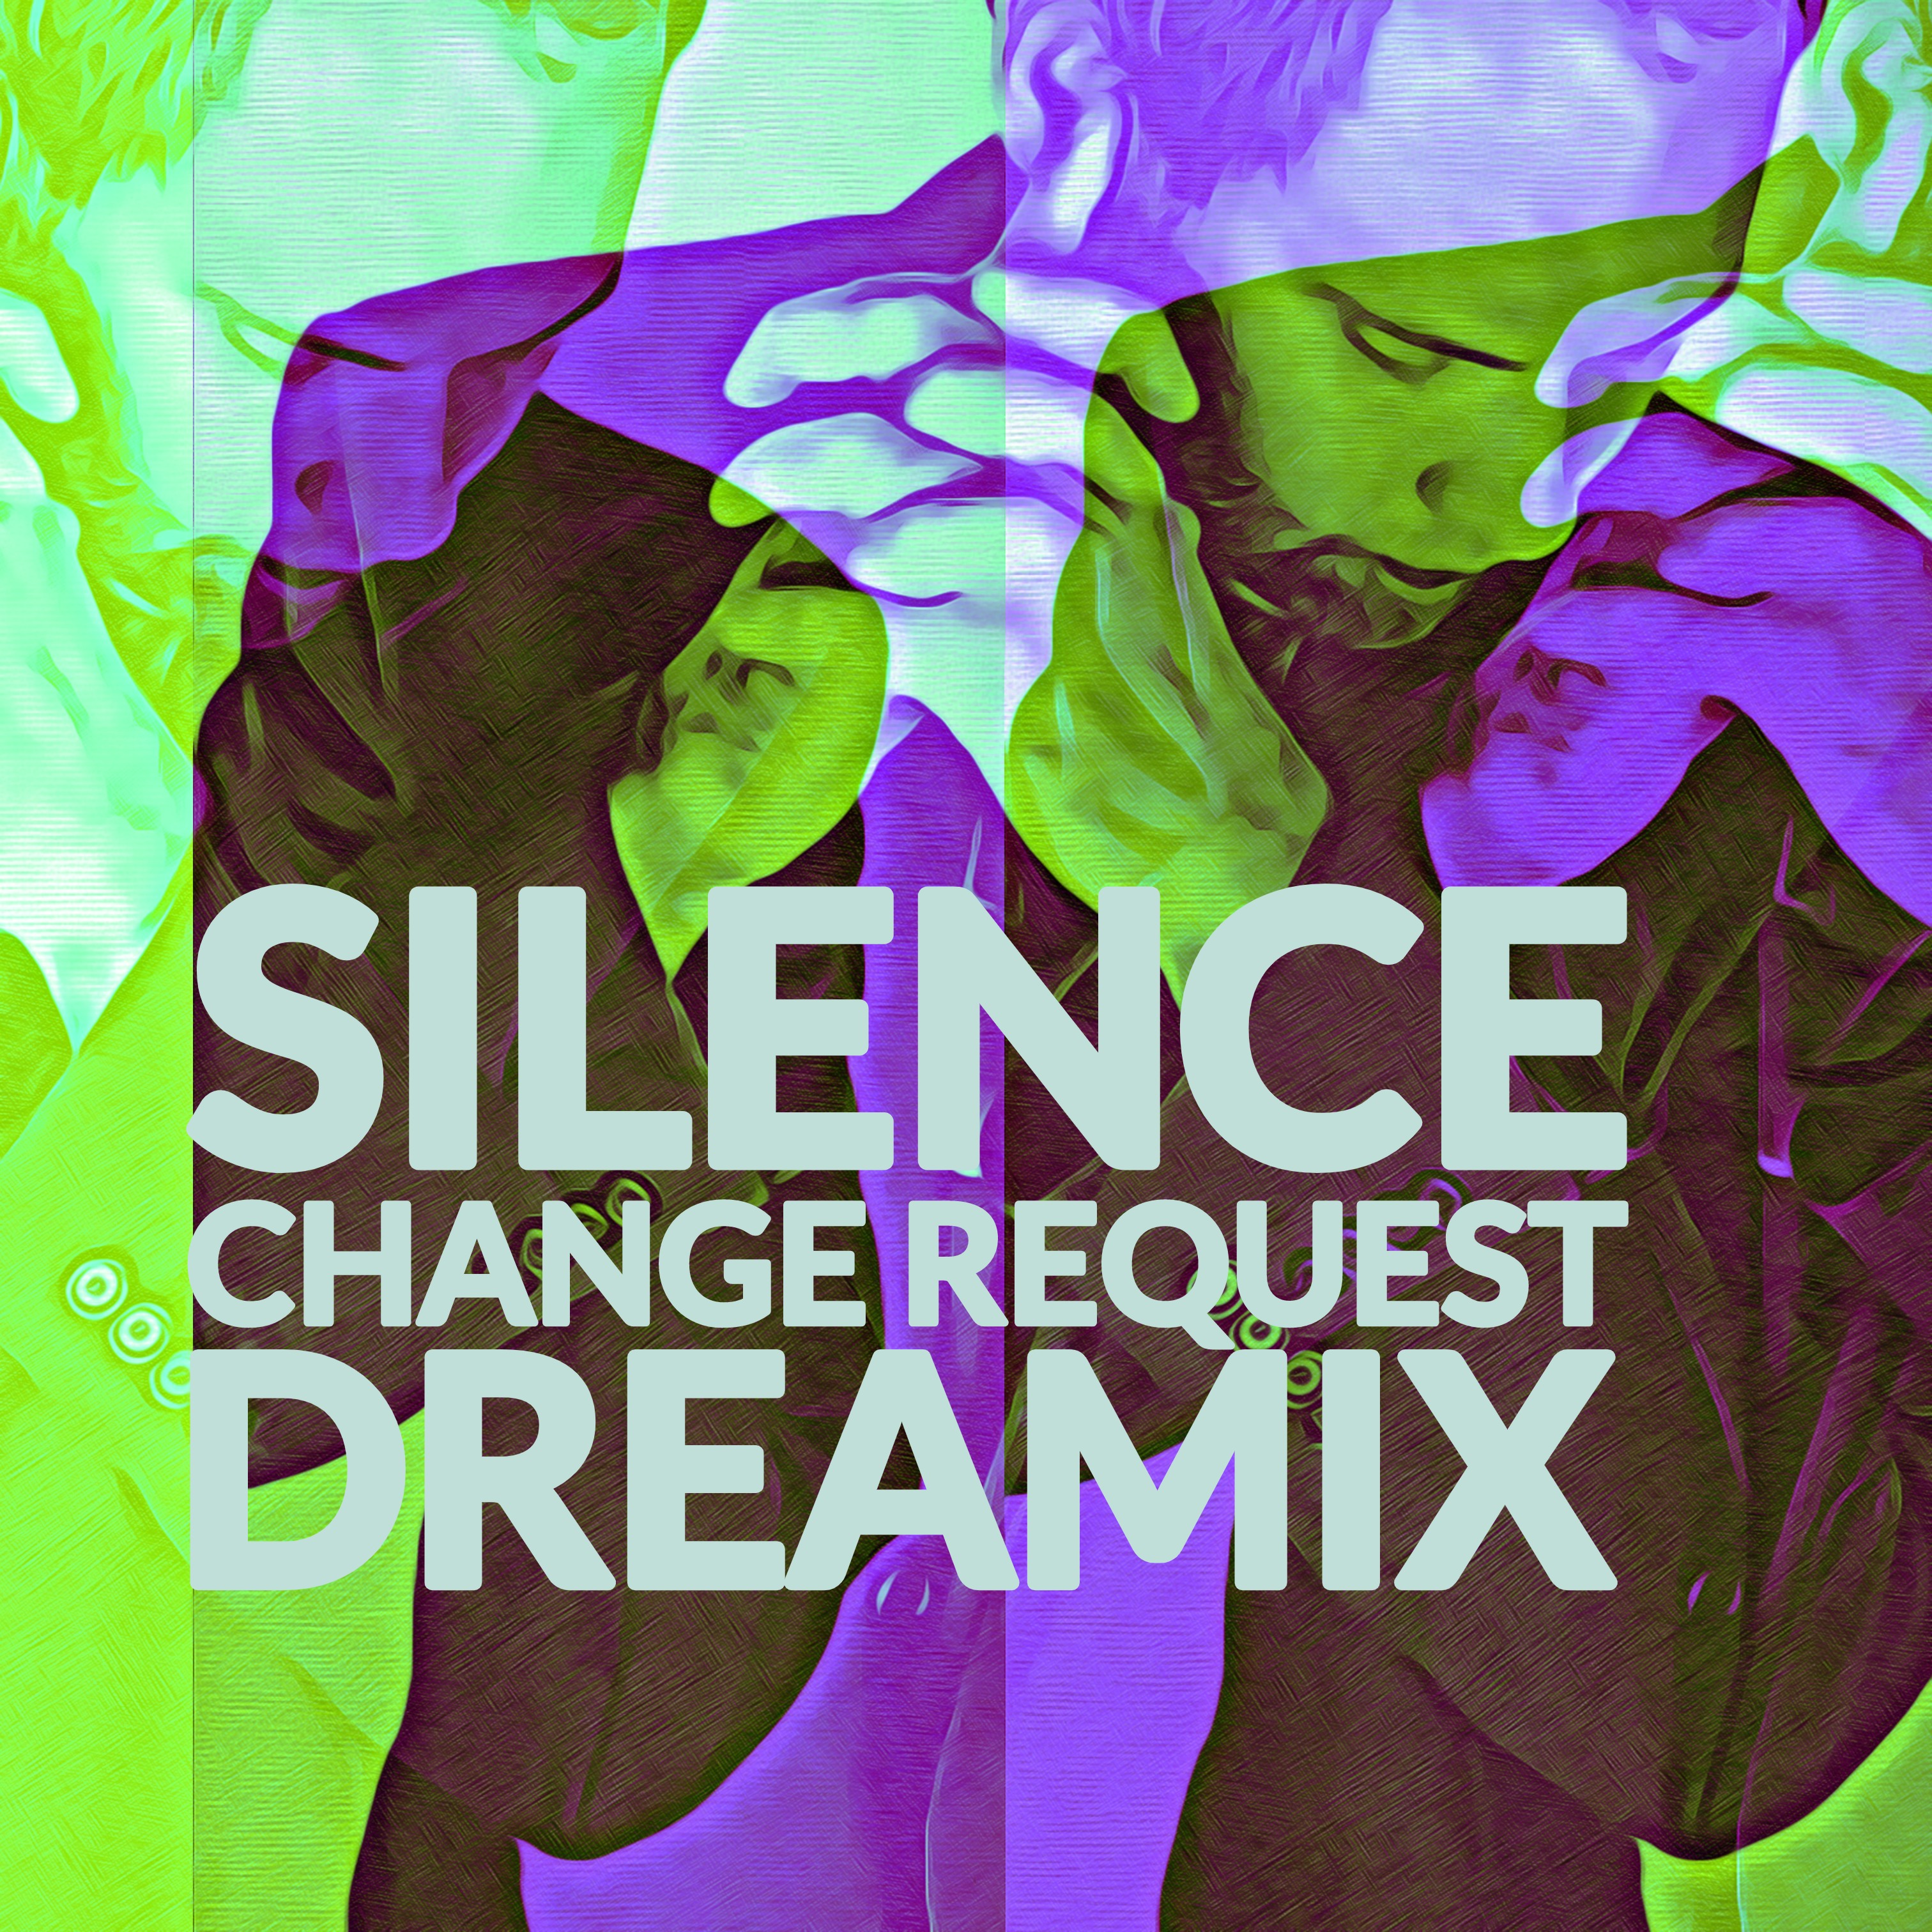 Silence (Change Request Dreamix)